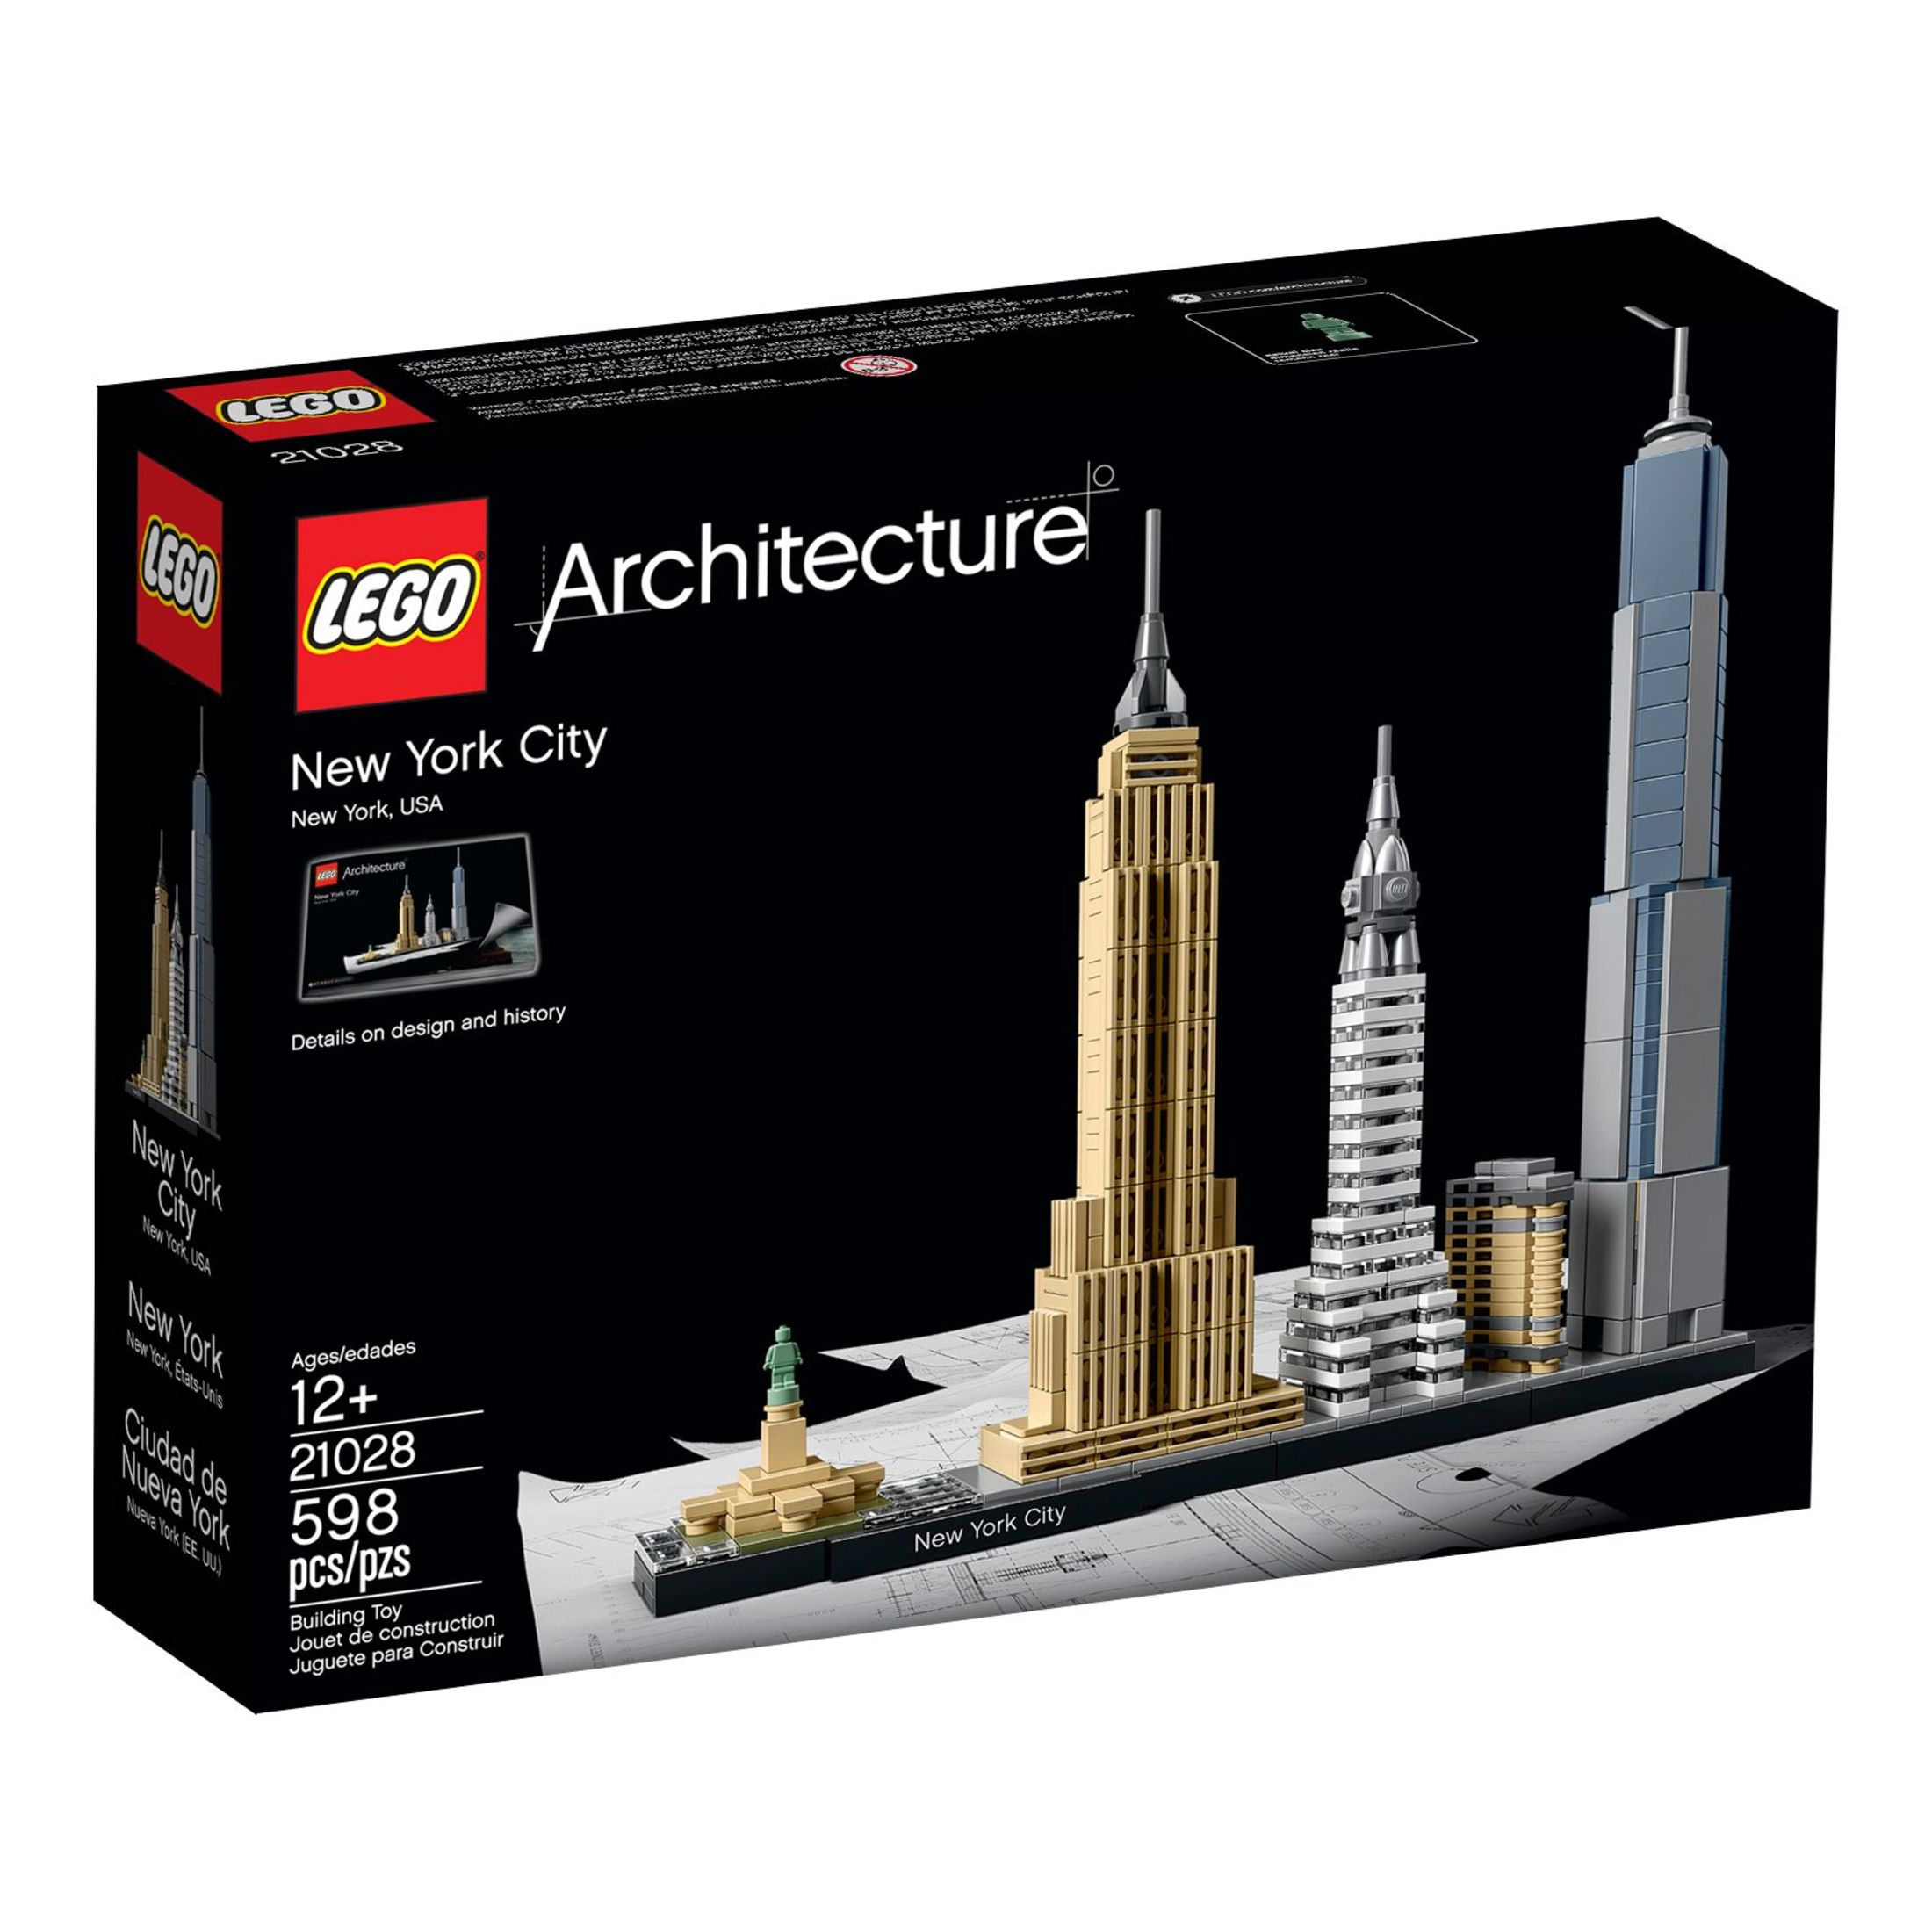 LEGO Architecture New York City Skyline 21028, Collectible Model Kit for Adults to Build, Creative Activity, Home Décor Gift Idea - image 2 of 5